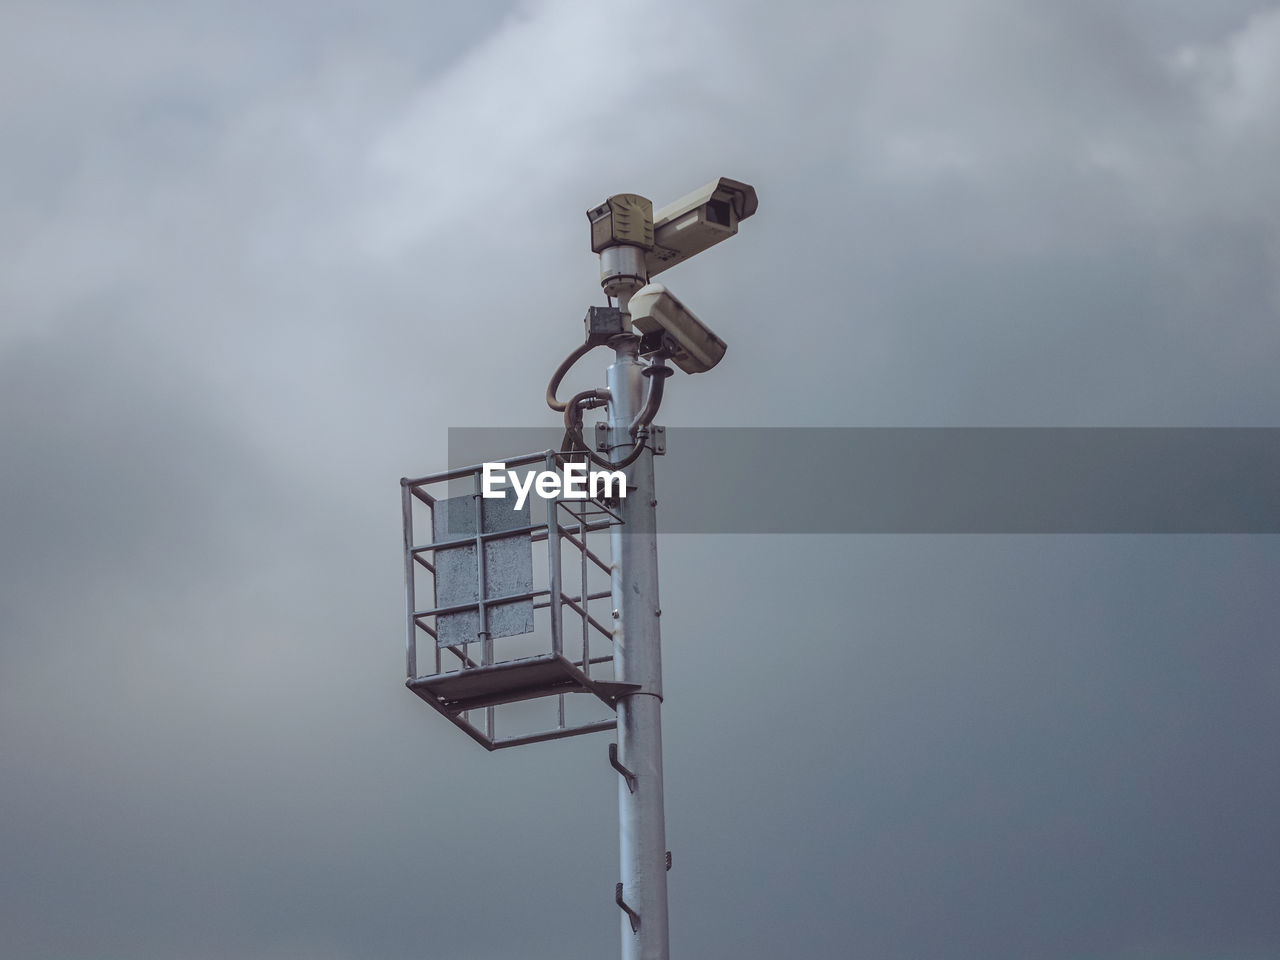 Traffic surveillance cctv camera on high tower pole and dramatic grey sky background